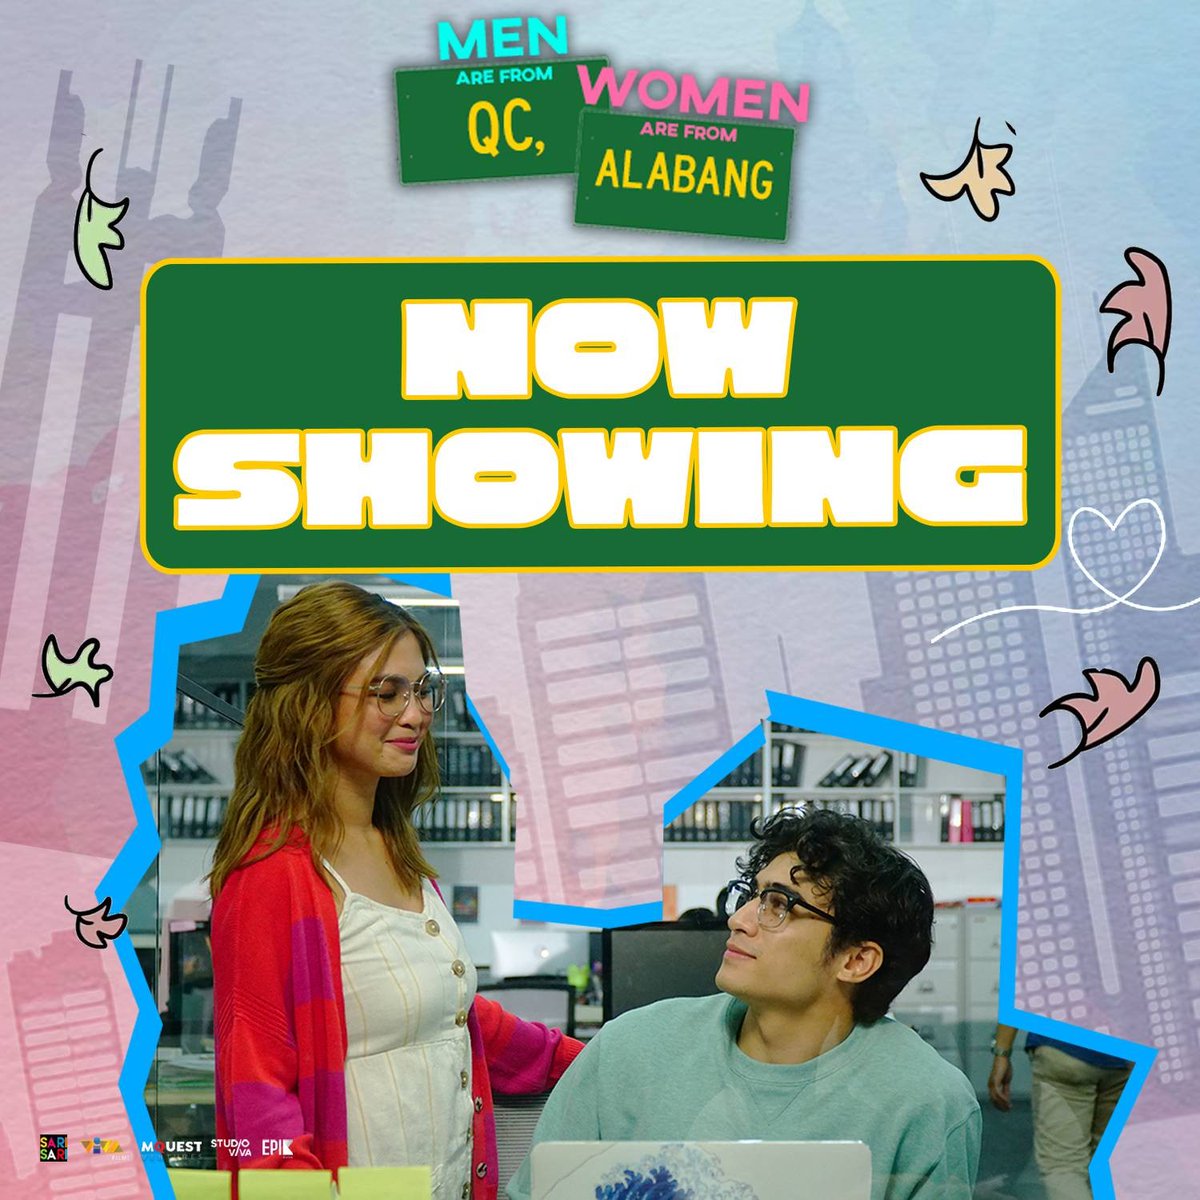 EXPERIENCE THE KIND OF LOVE NA G MAG-KOMYUT FOR YOU! 'Men Are From QC, Women Are From Alabang' NOW SHOWING IN CINEMAS! starring #HeavenPeralejo and #MarcoGallo Directed by Gino M. Santos. Based on the best-selling book by Stanley Chi! #MarVen #QCAlabang